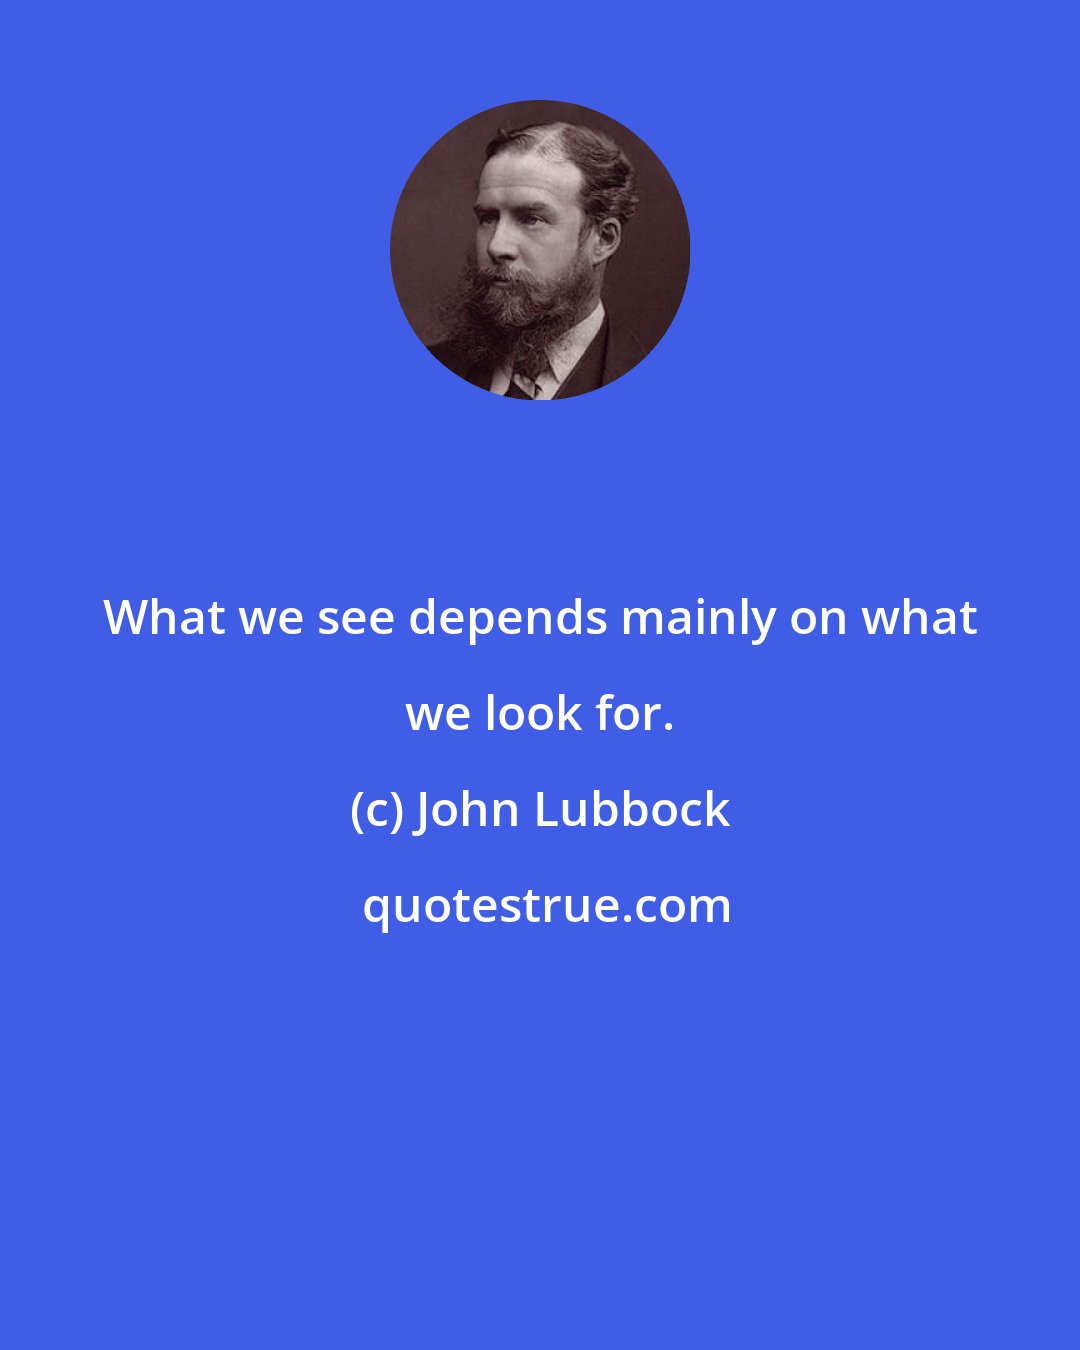 John Lubbock: What we see depends mainly on what we look for.